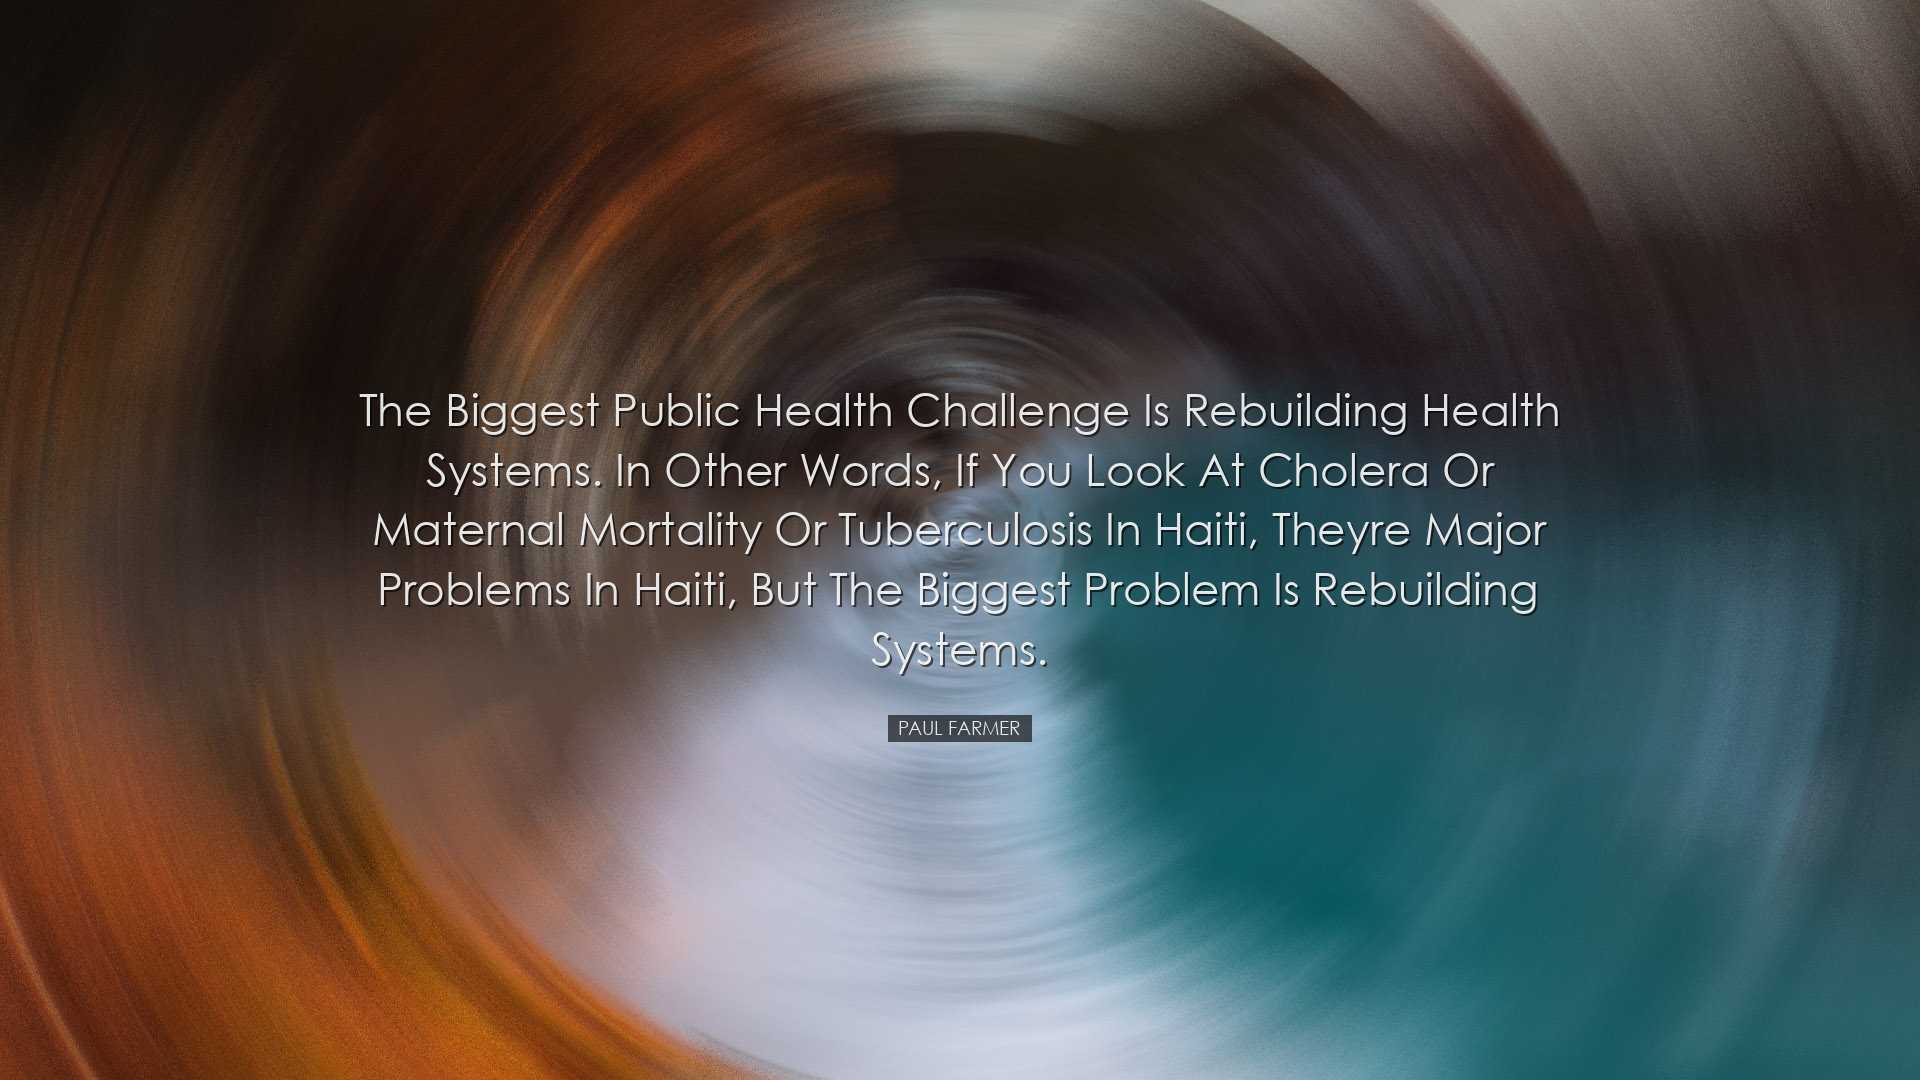 The biggest public health challenge is rebuilding health systems.